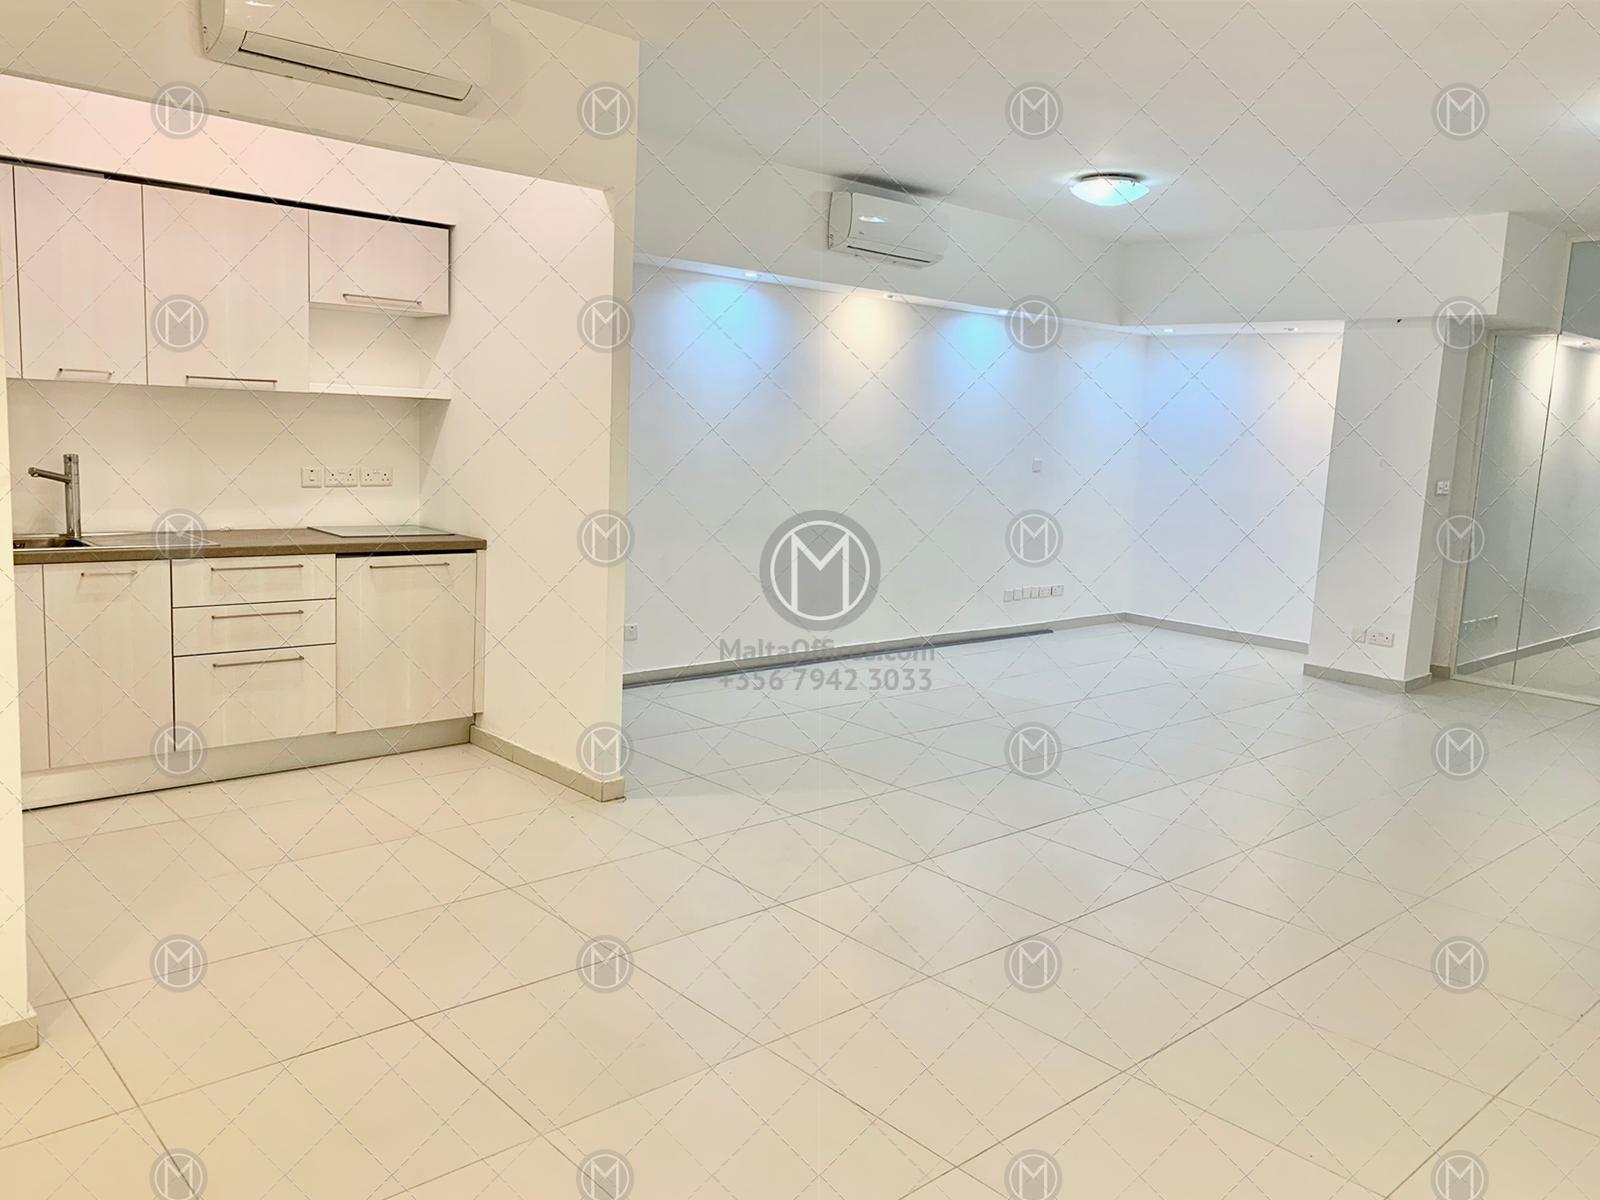 Office for rent on Tower Road in Sliema (90m2) - (1)